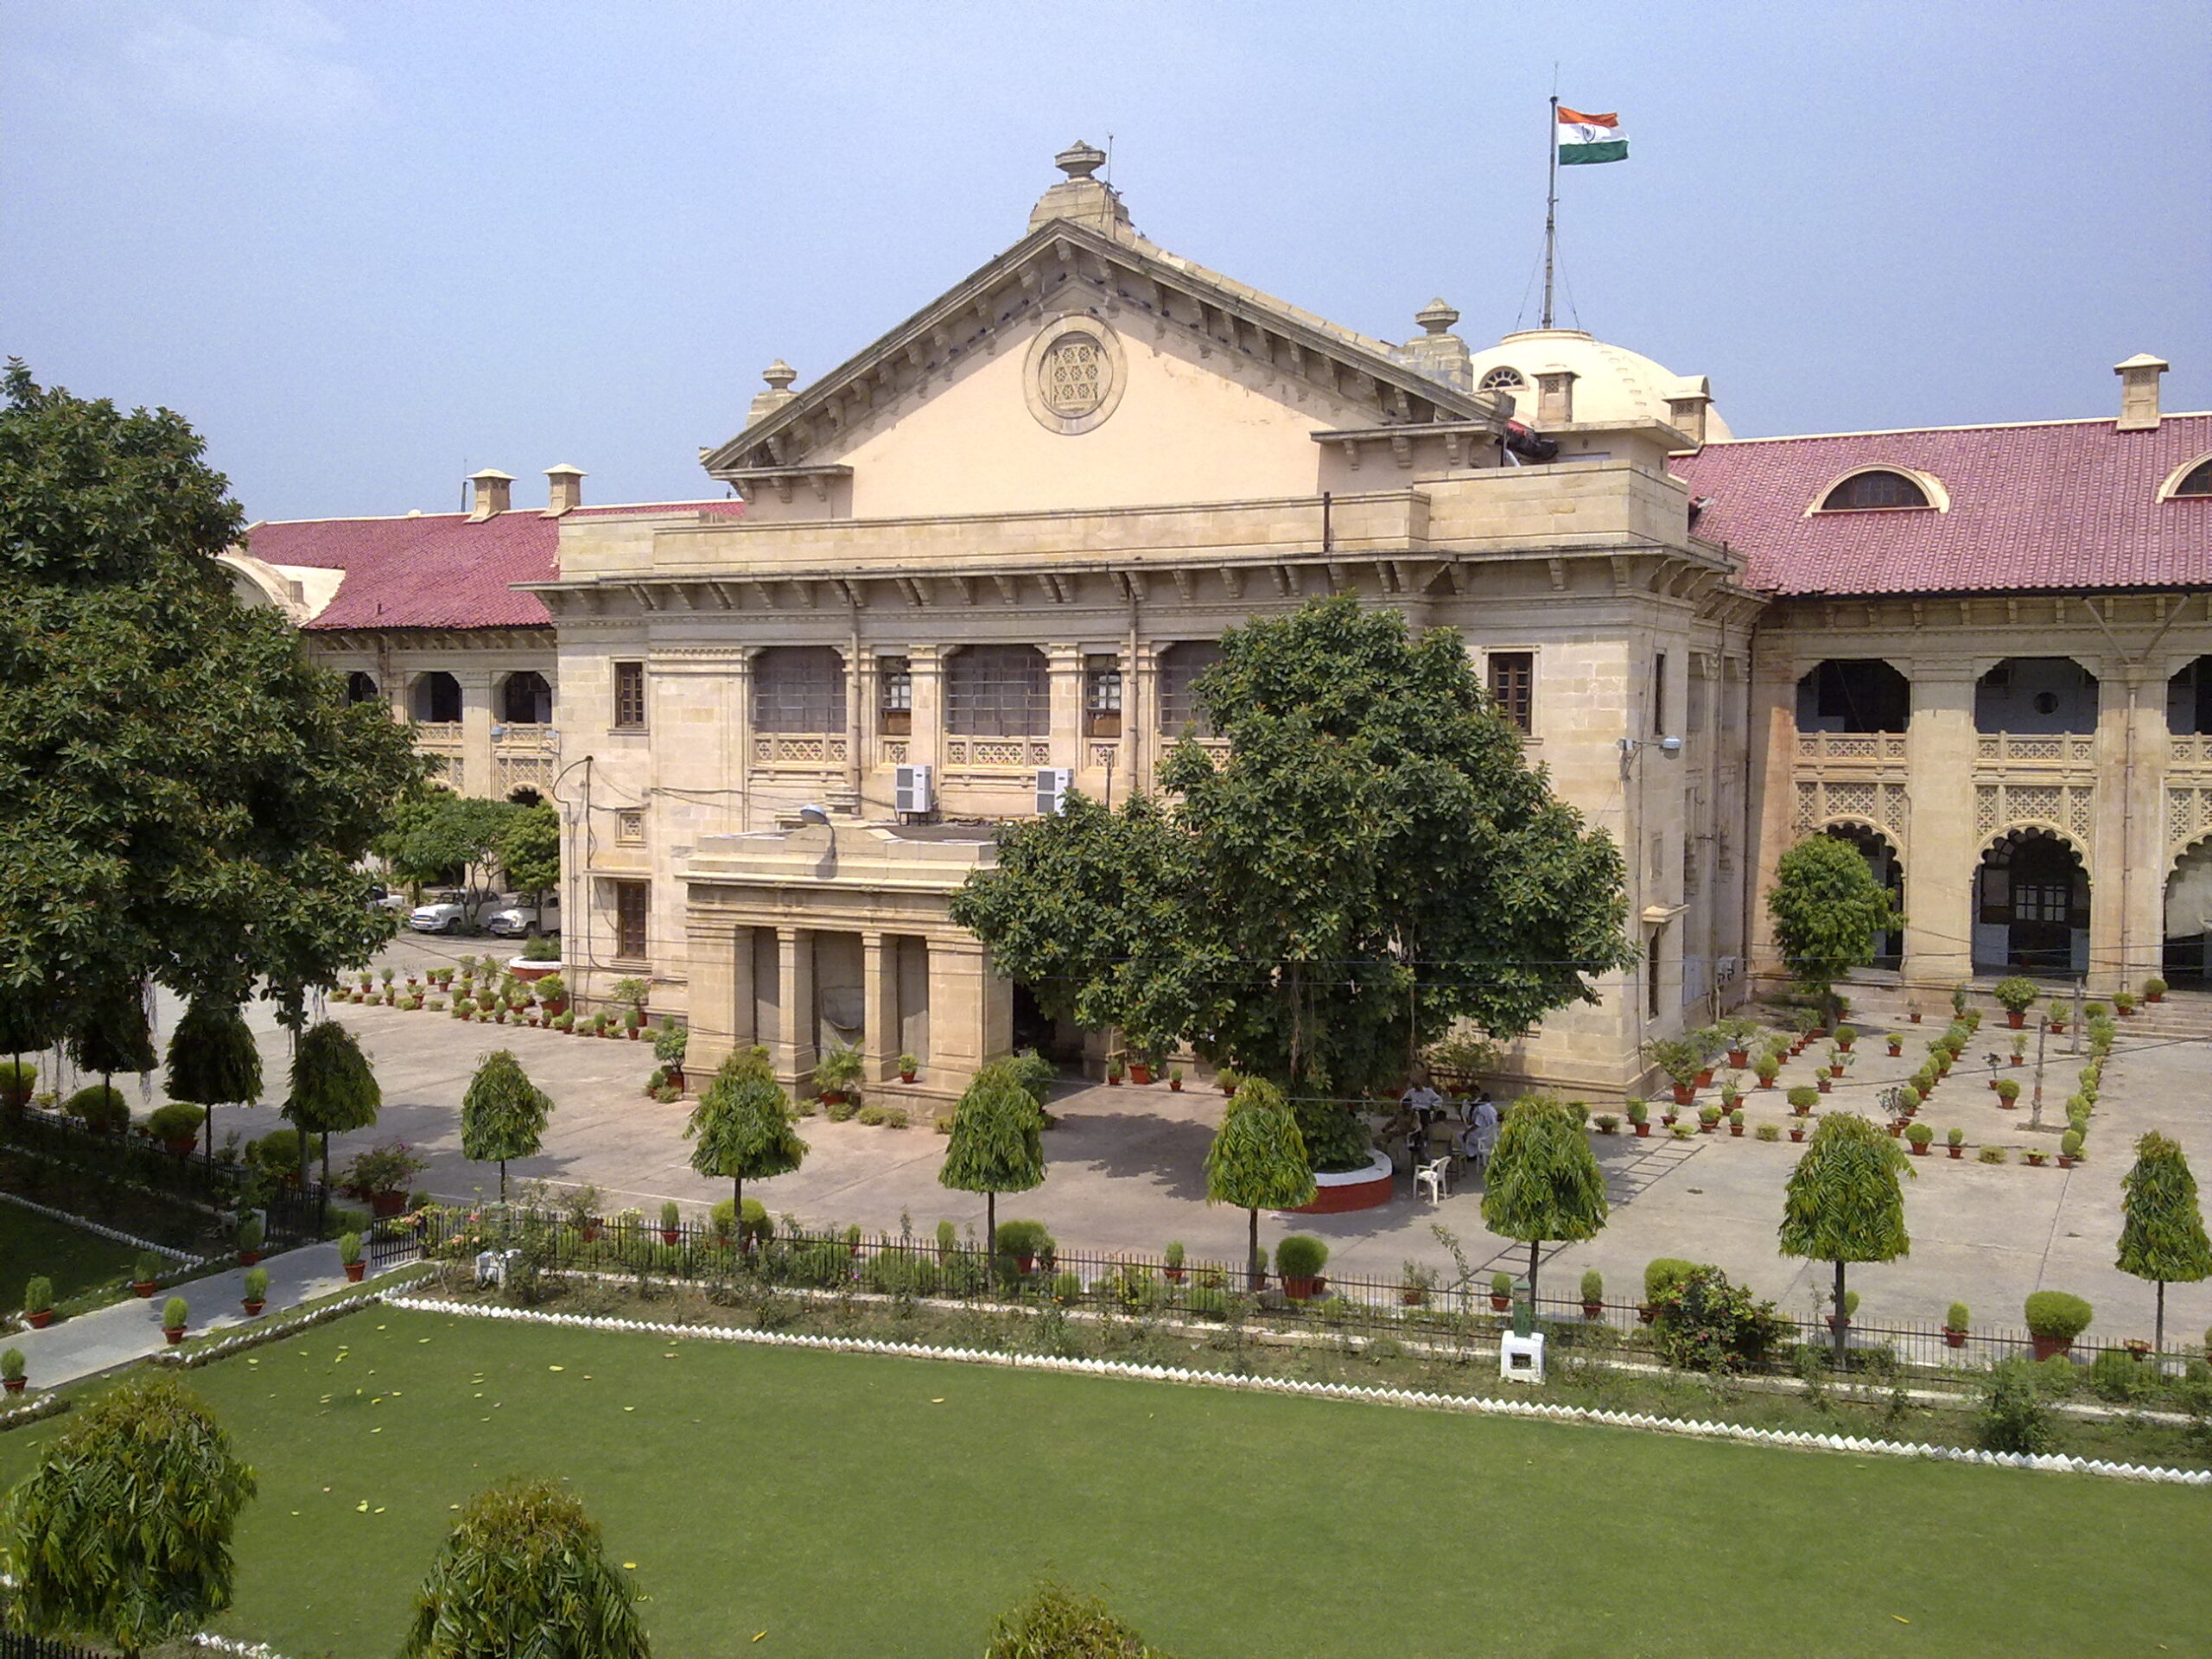 Offence Punishable U/S 506 IPC If Committed In Uttar Pradesh Is A Cognizable Offence: Lucknow Bench Of Allahabad HC